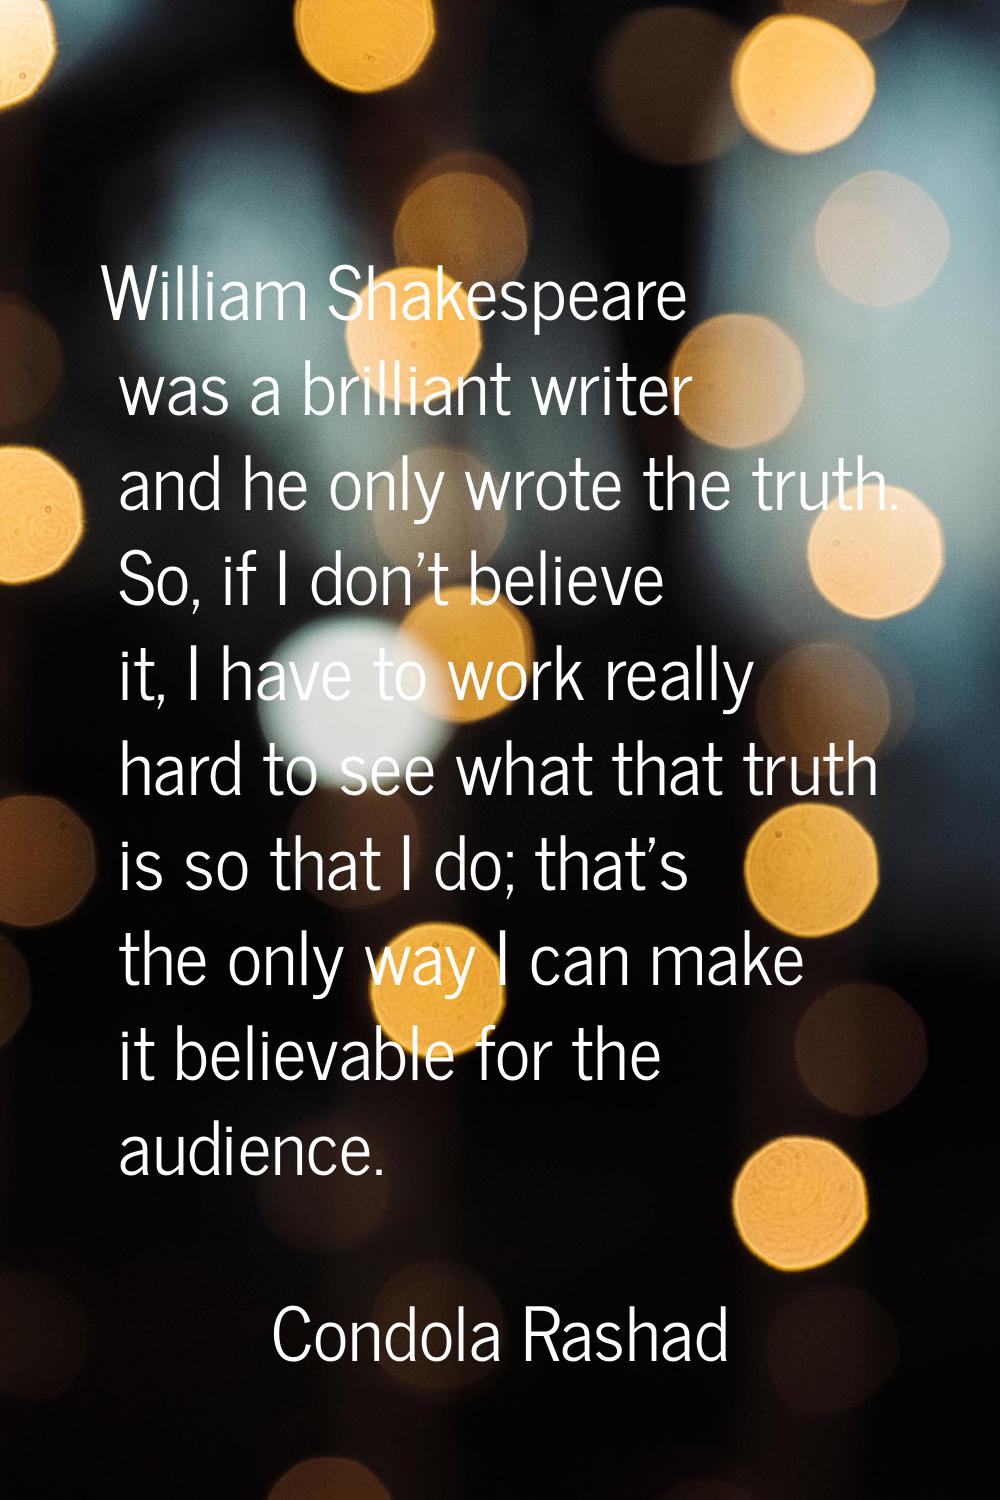 William Shakespeare was a brilliant writer and he only wrote the truth. So, if I don't believe it, 